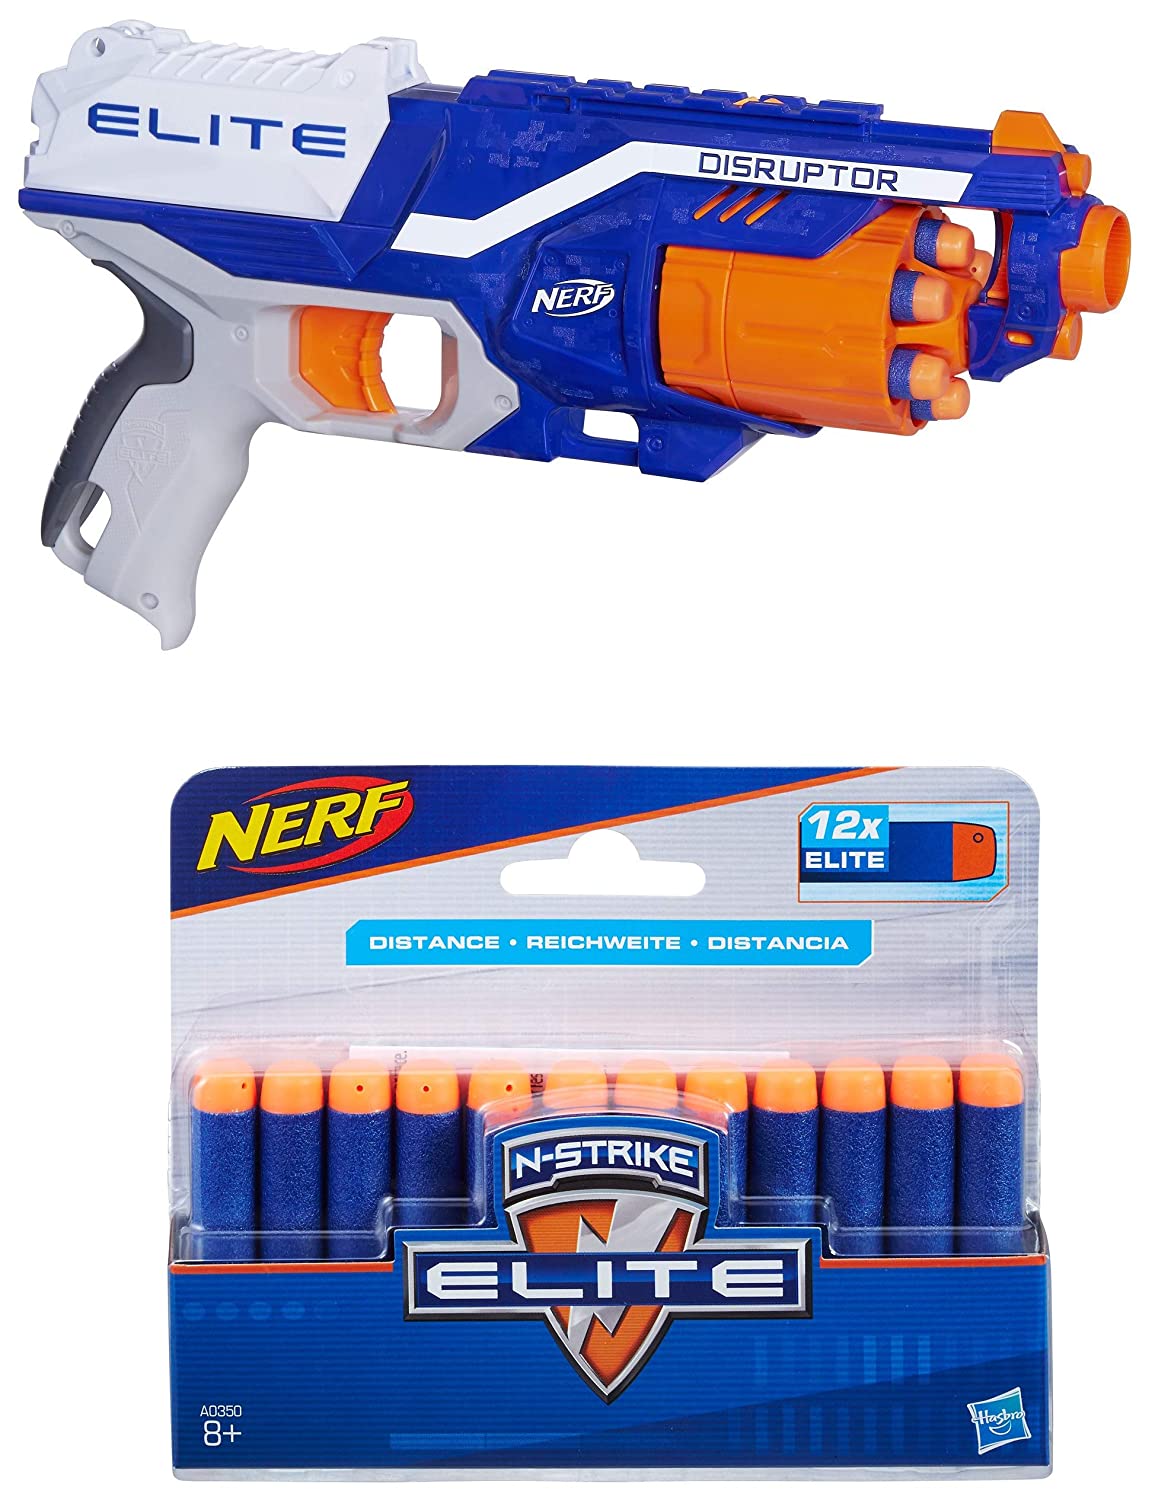 Nerf Disruptor Elite Blaster - 6-Dart Rotating Drum, Slam Fire, Includes 6  Official Nerf Elite Darts - for Kids, Teens, Adults, ( Exclusive)